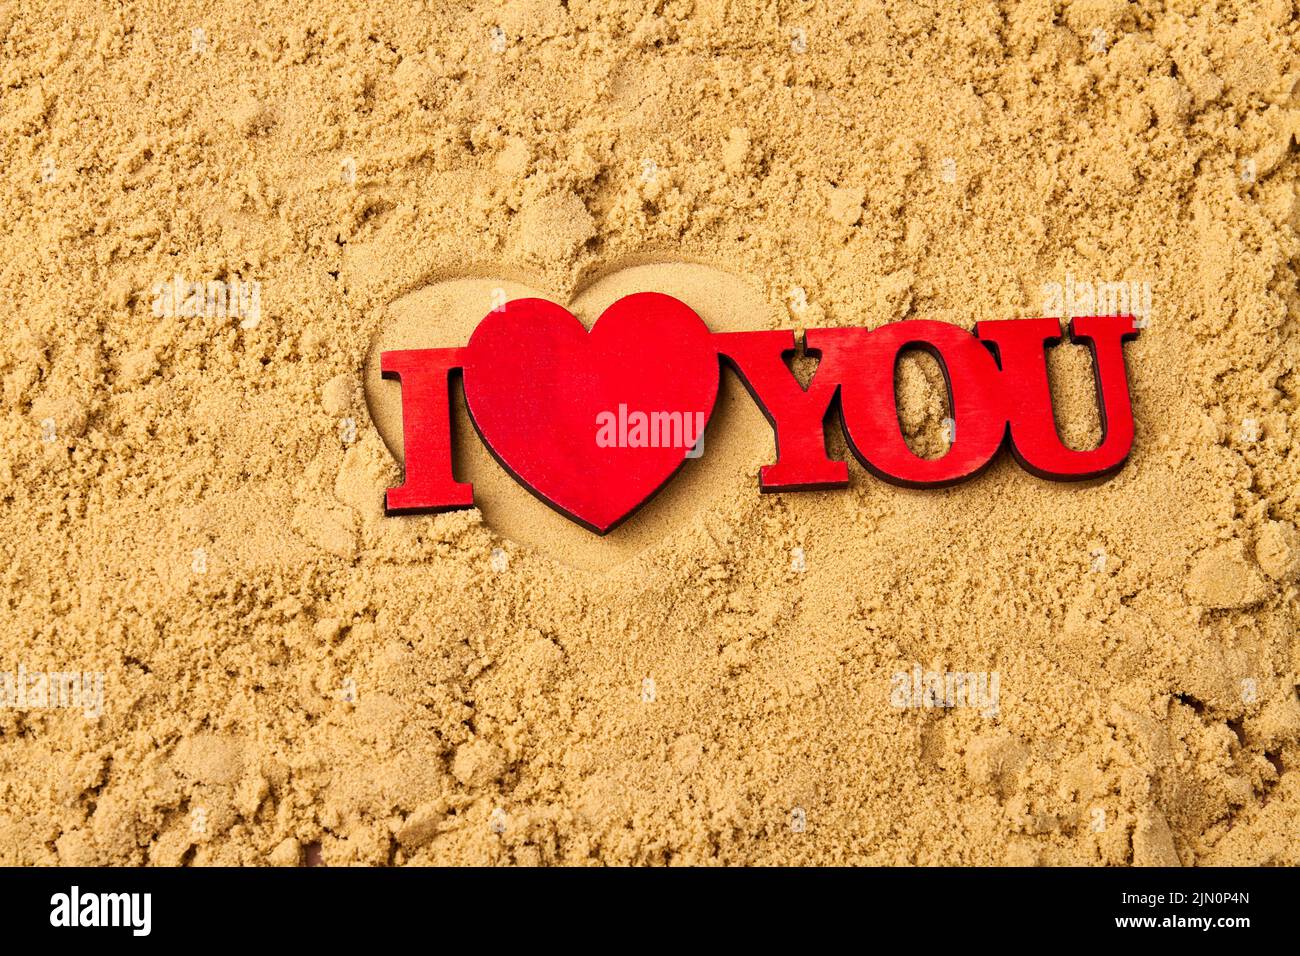 Honeymoon vacation or valentines day concept. Red I love you words on the sand. Stock Photo